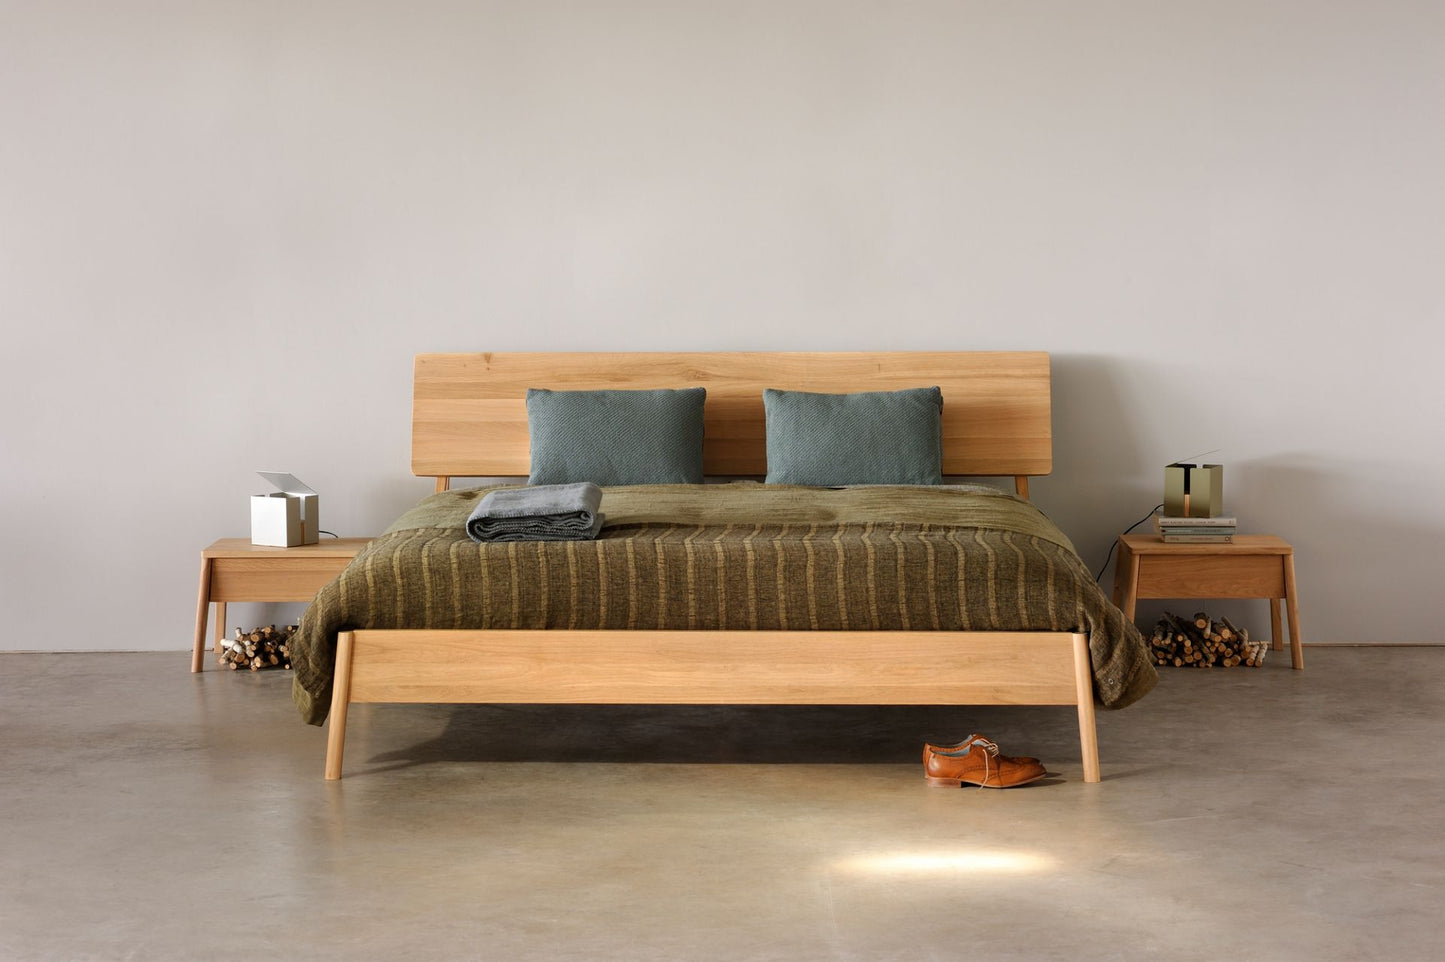 Ethnicraft Oak Air Bed is available from Make Your House A Home, Bendigo, Victoria, Australia